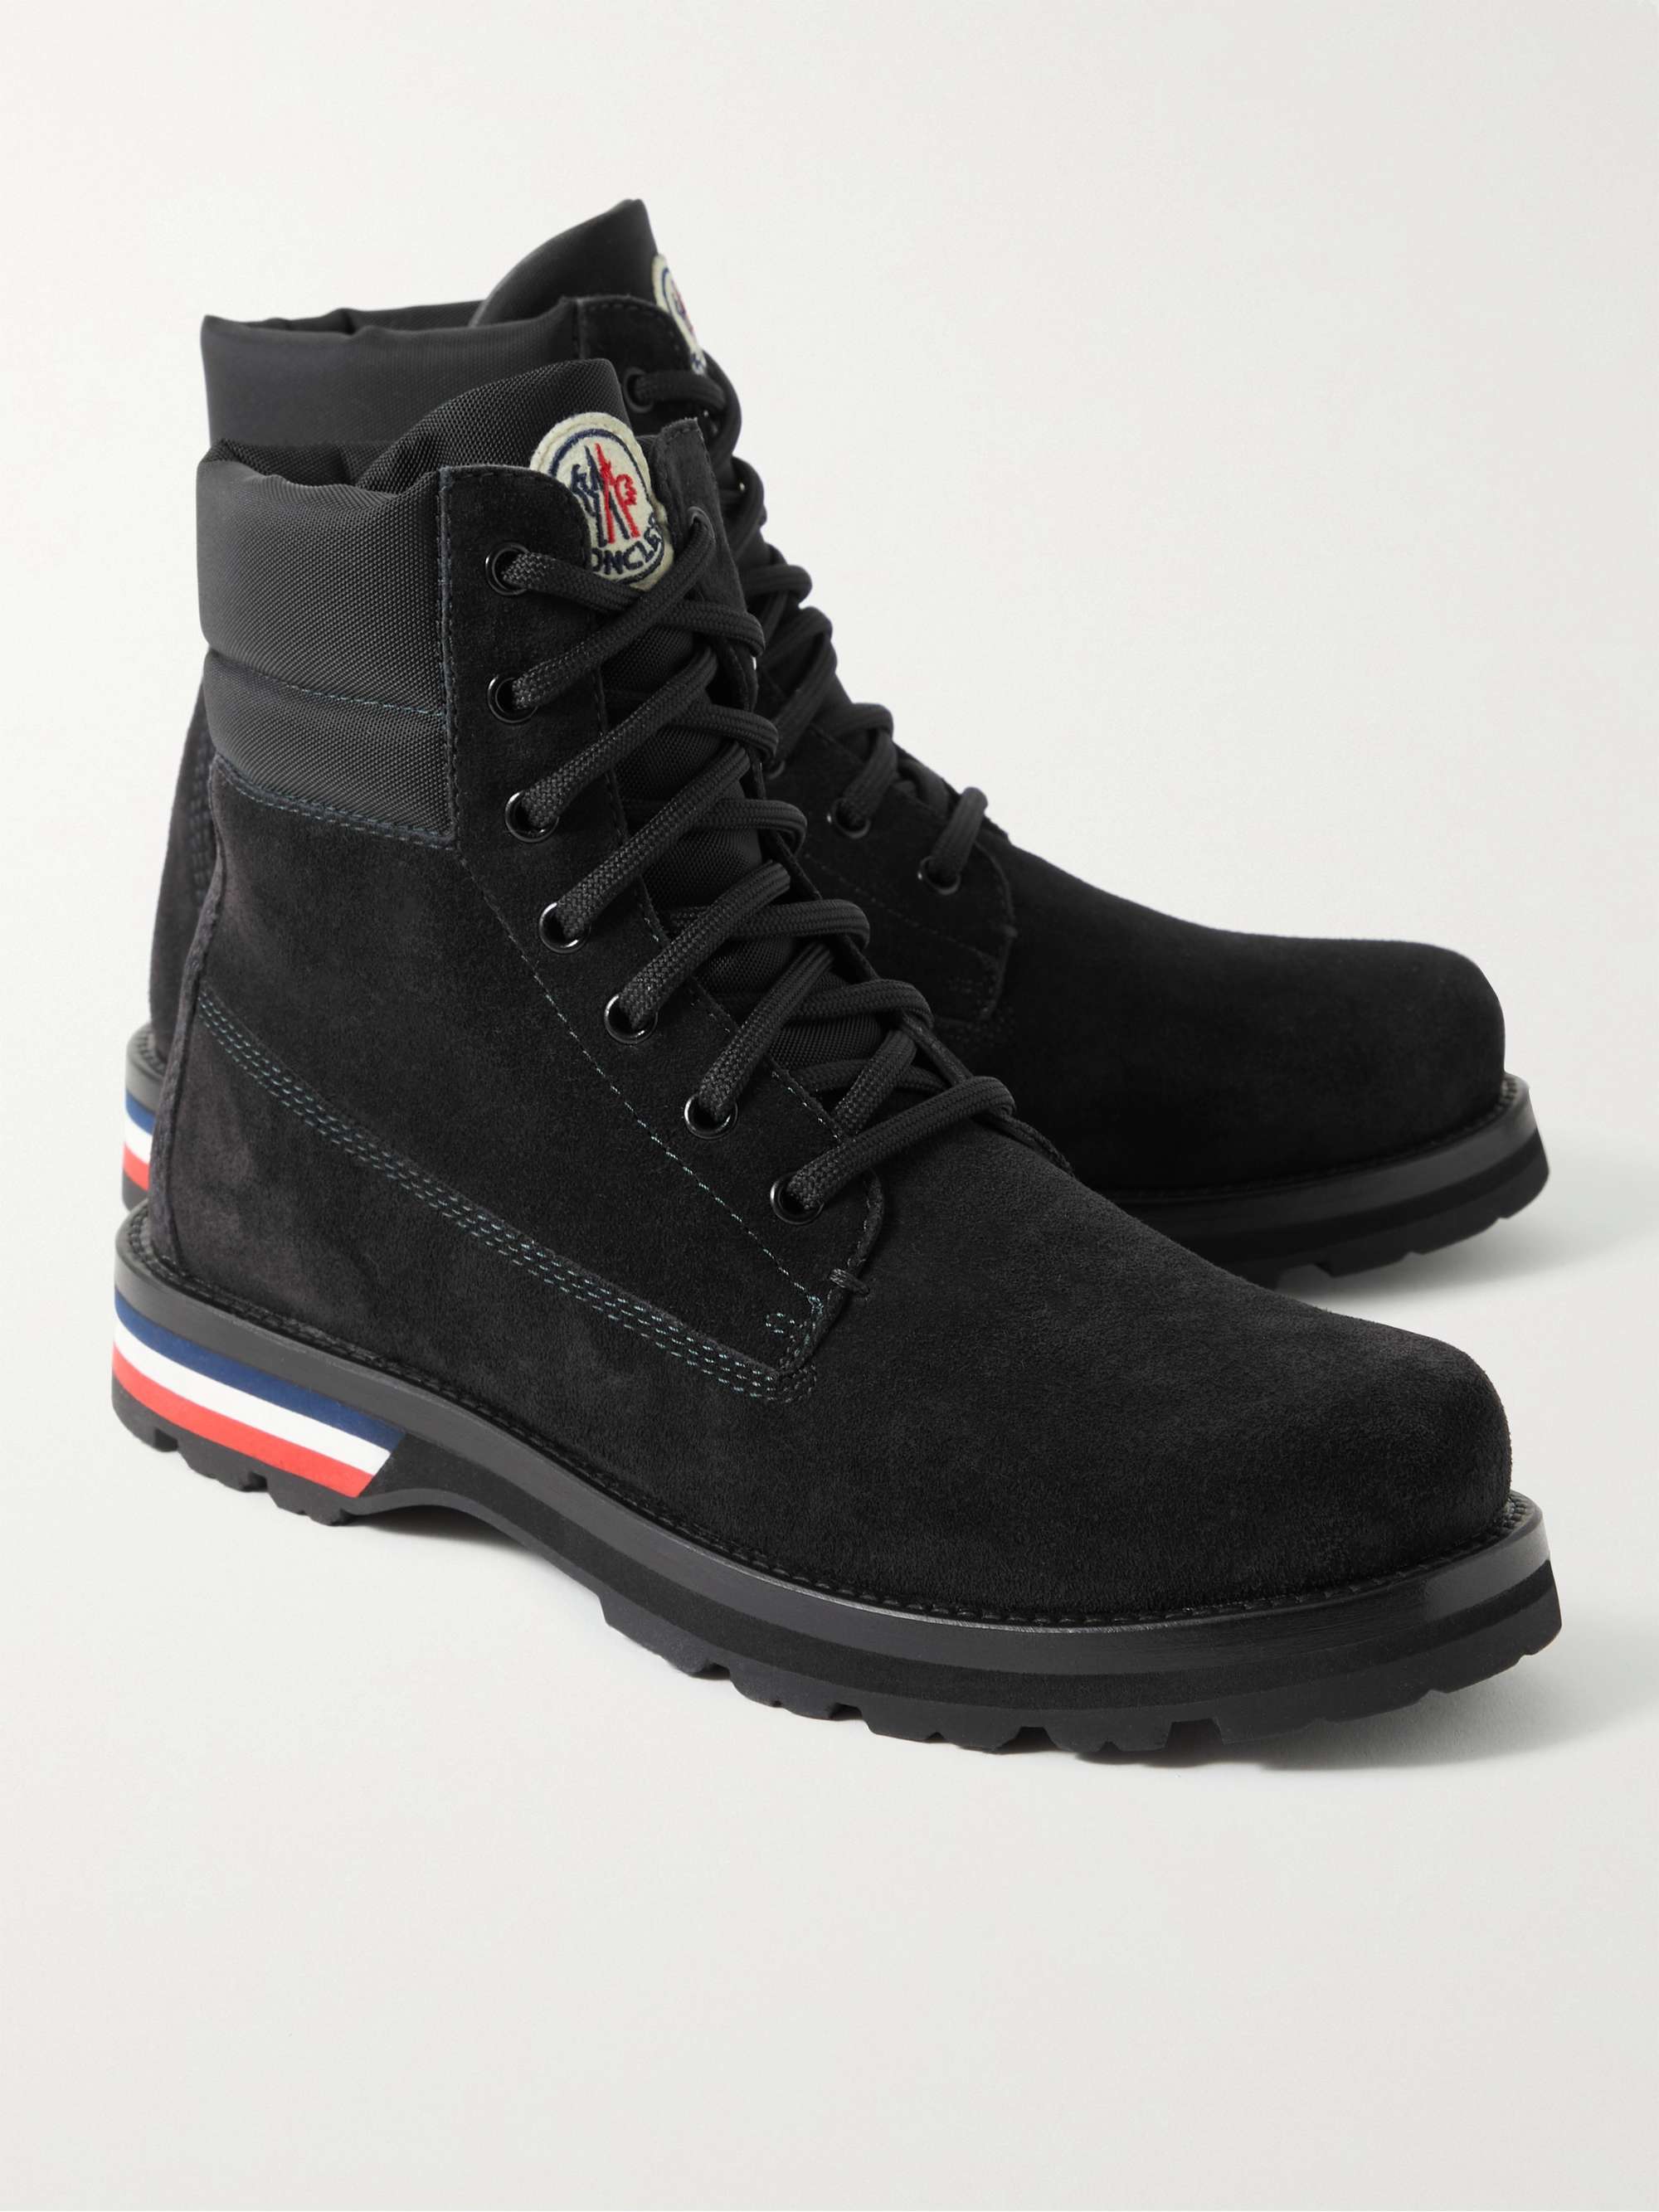 MONCLER Vancouver Shell-Trimmed Suede Hiking Boots